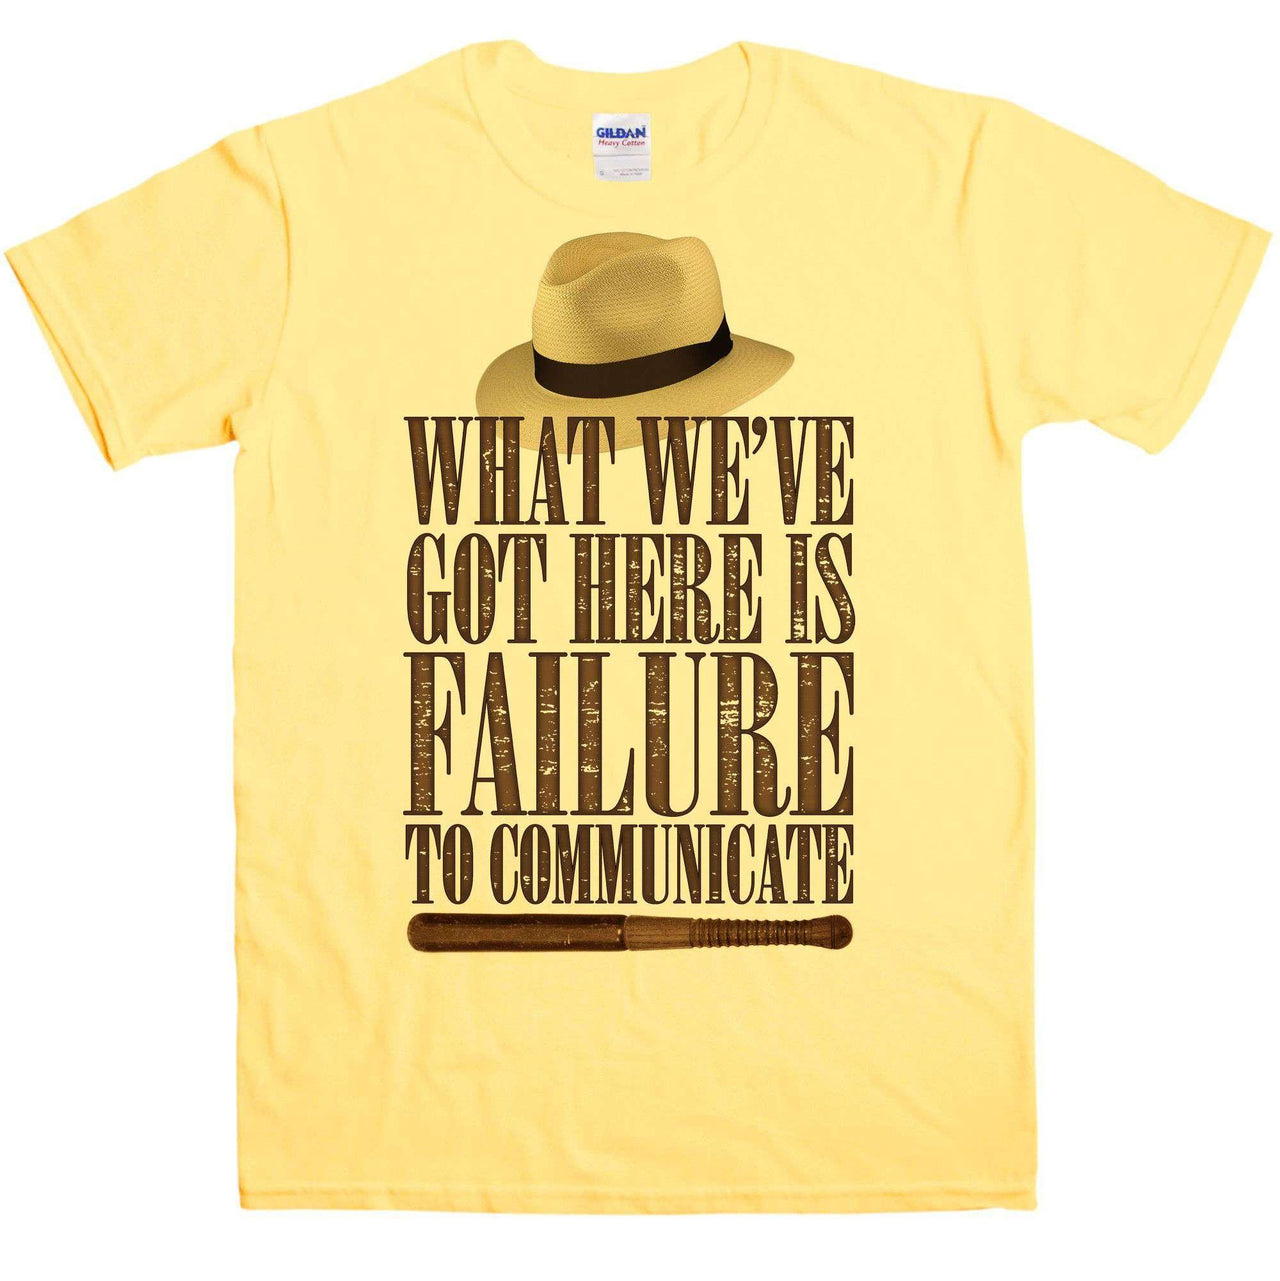 Failure To Communicate Graphic T-Shirt For Men 8Ball